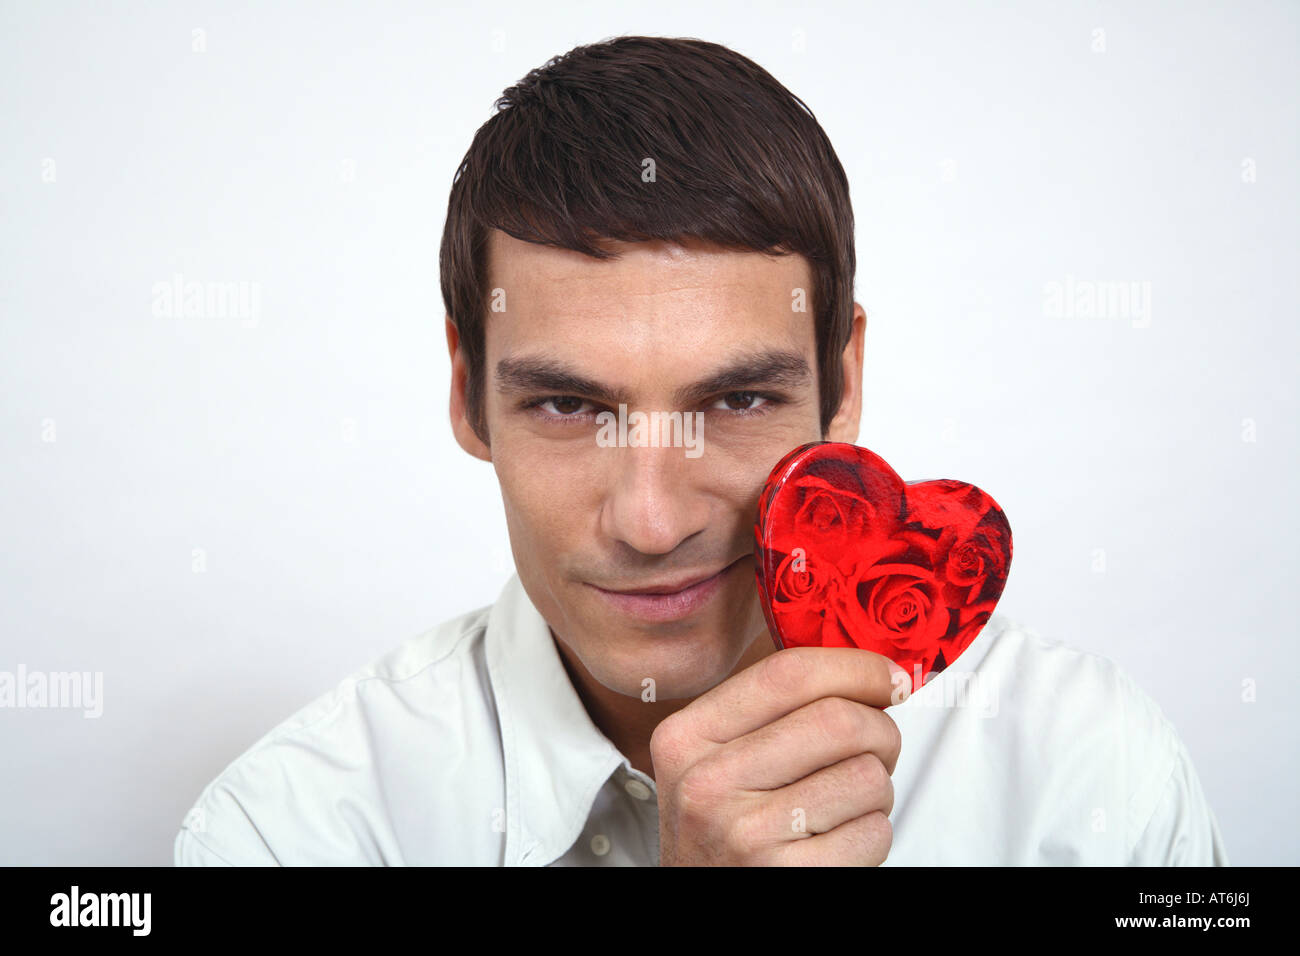 Man holding red heart, close-up Stock Photo